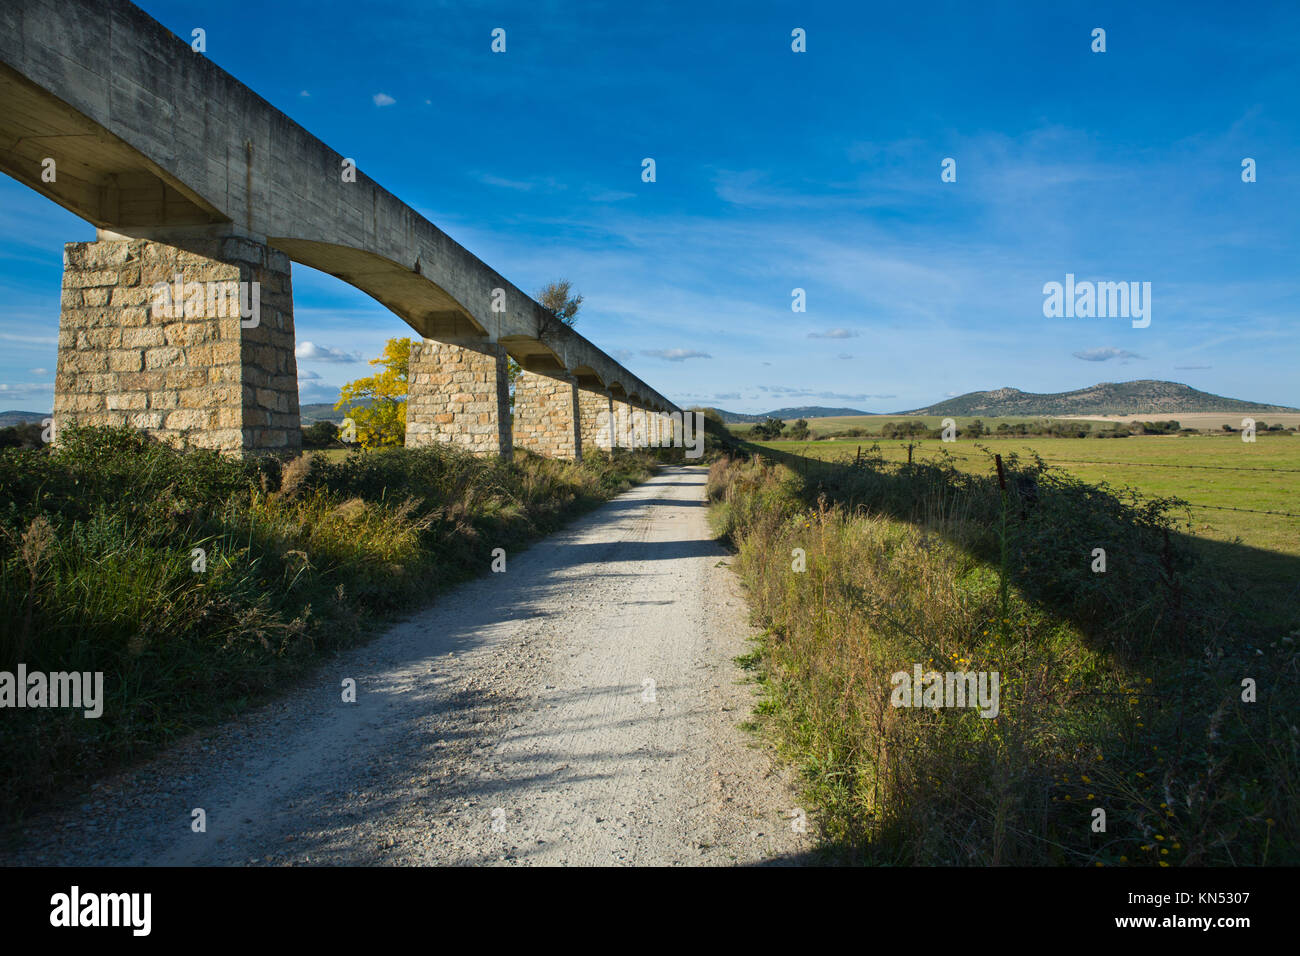 View of a irrigation canal built in concrete and stone, Valdesalor, Caceres, Spain. Stock Photo